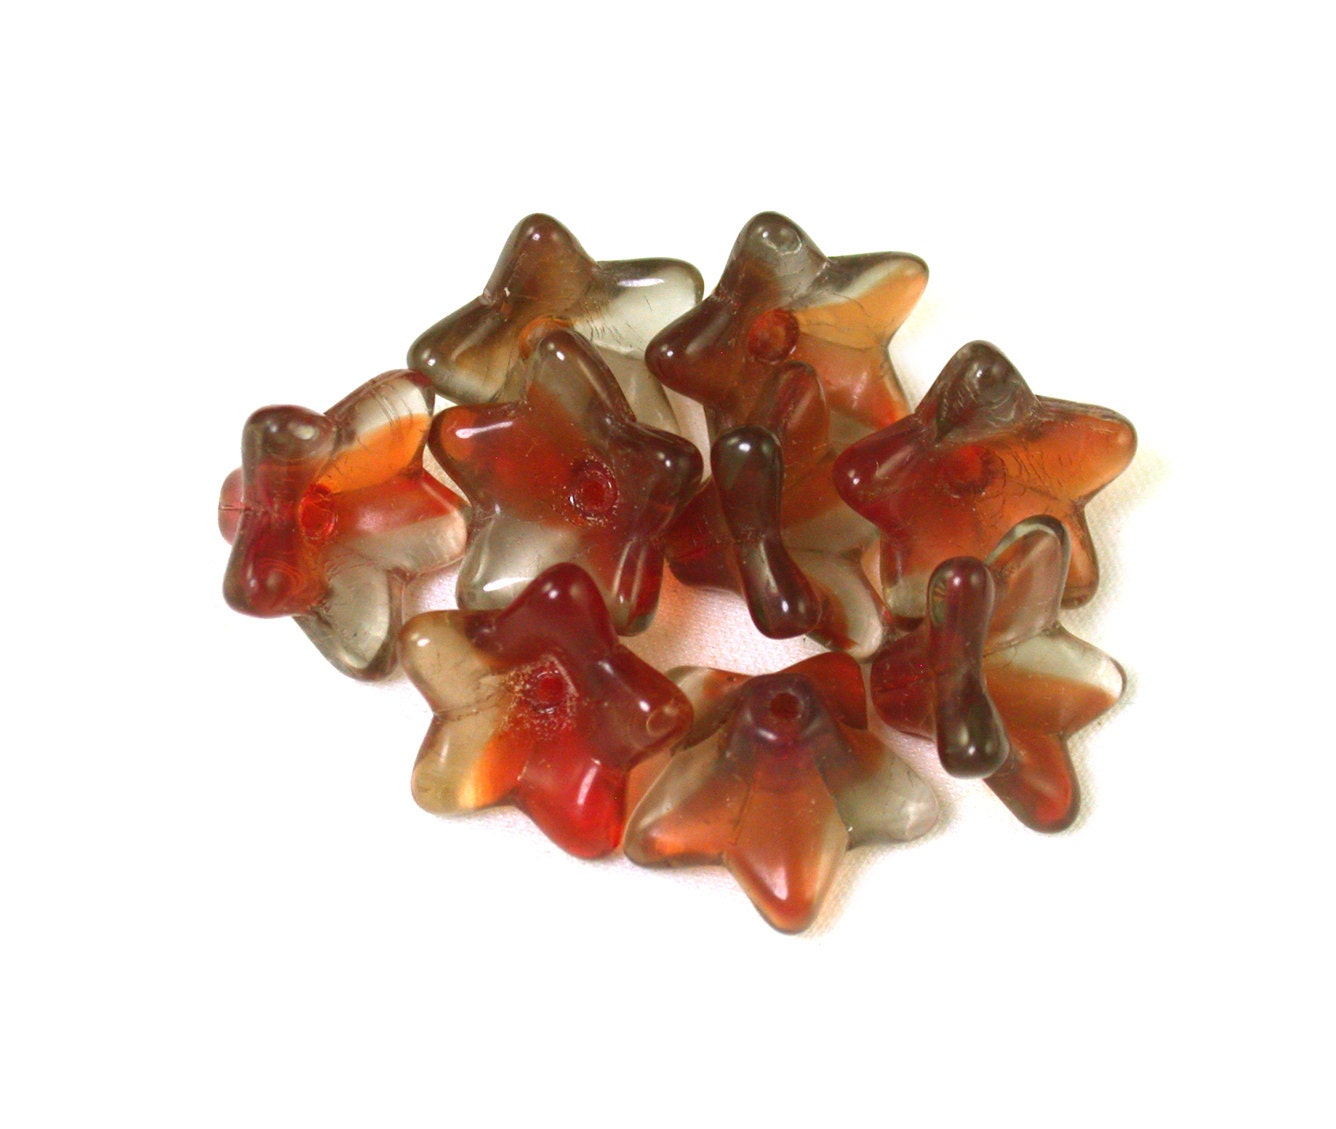 Orange Red Gray Transparent Blend 13mm Five Pointed Cup Flowers. Set Of 10 Or 20